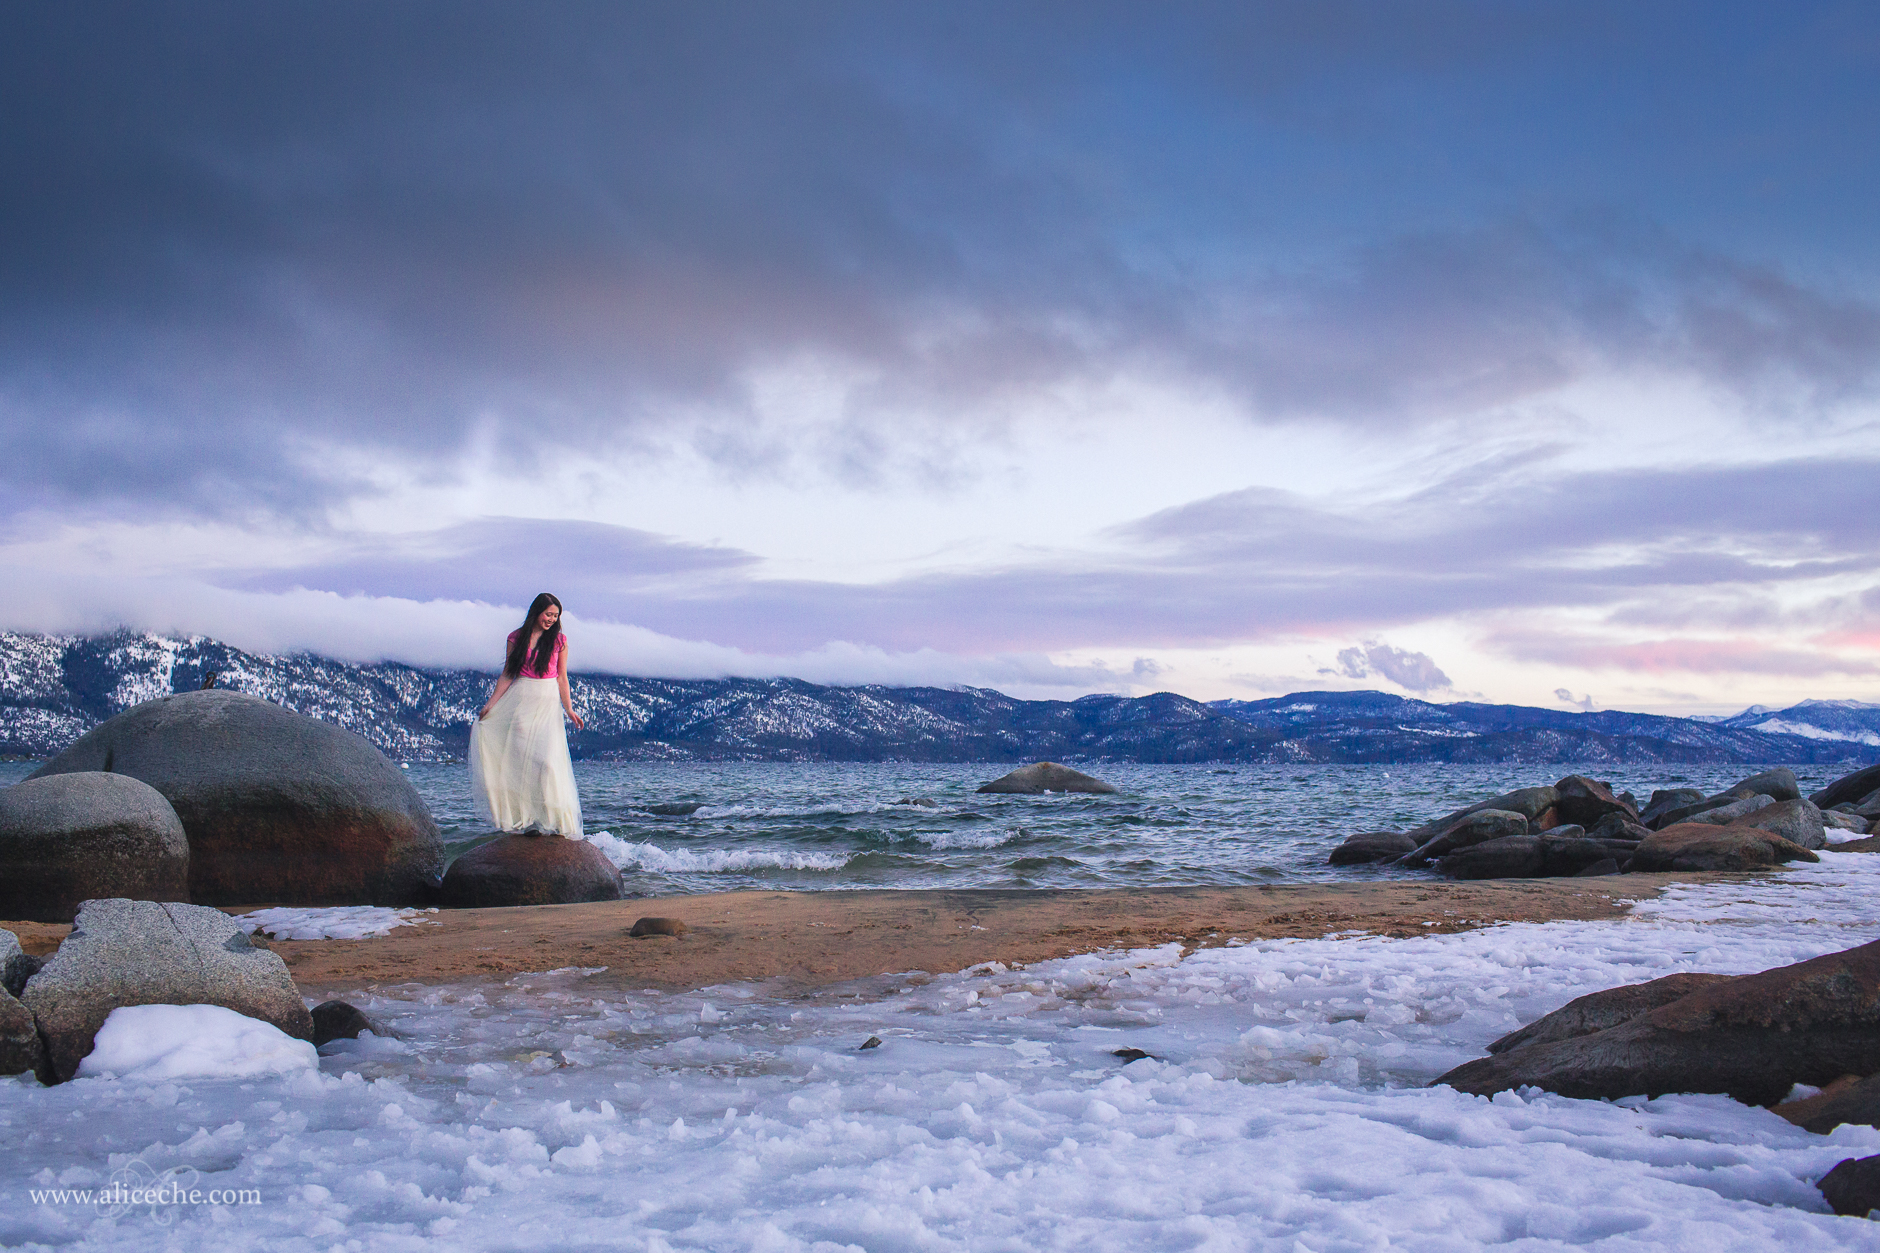 alice-che-photography-lake-tahoe-self-portrait-sunset-by-lake